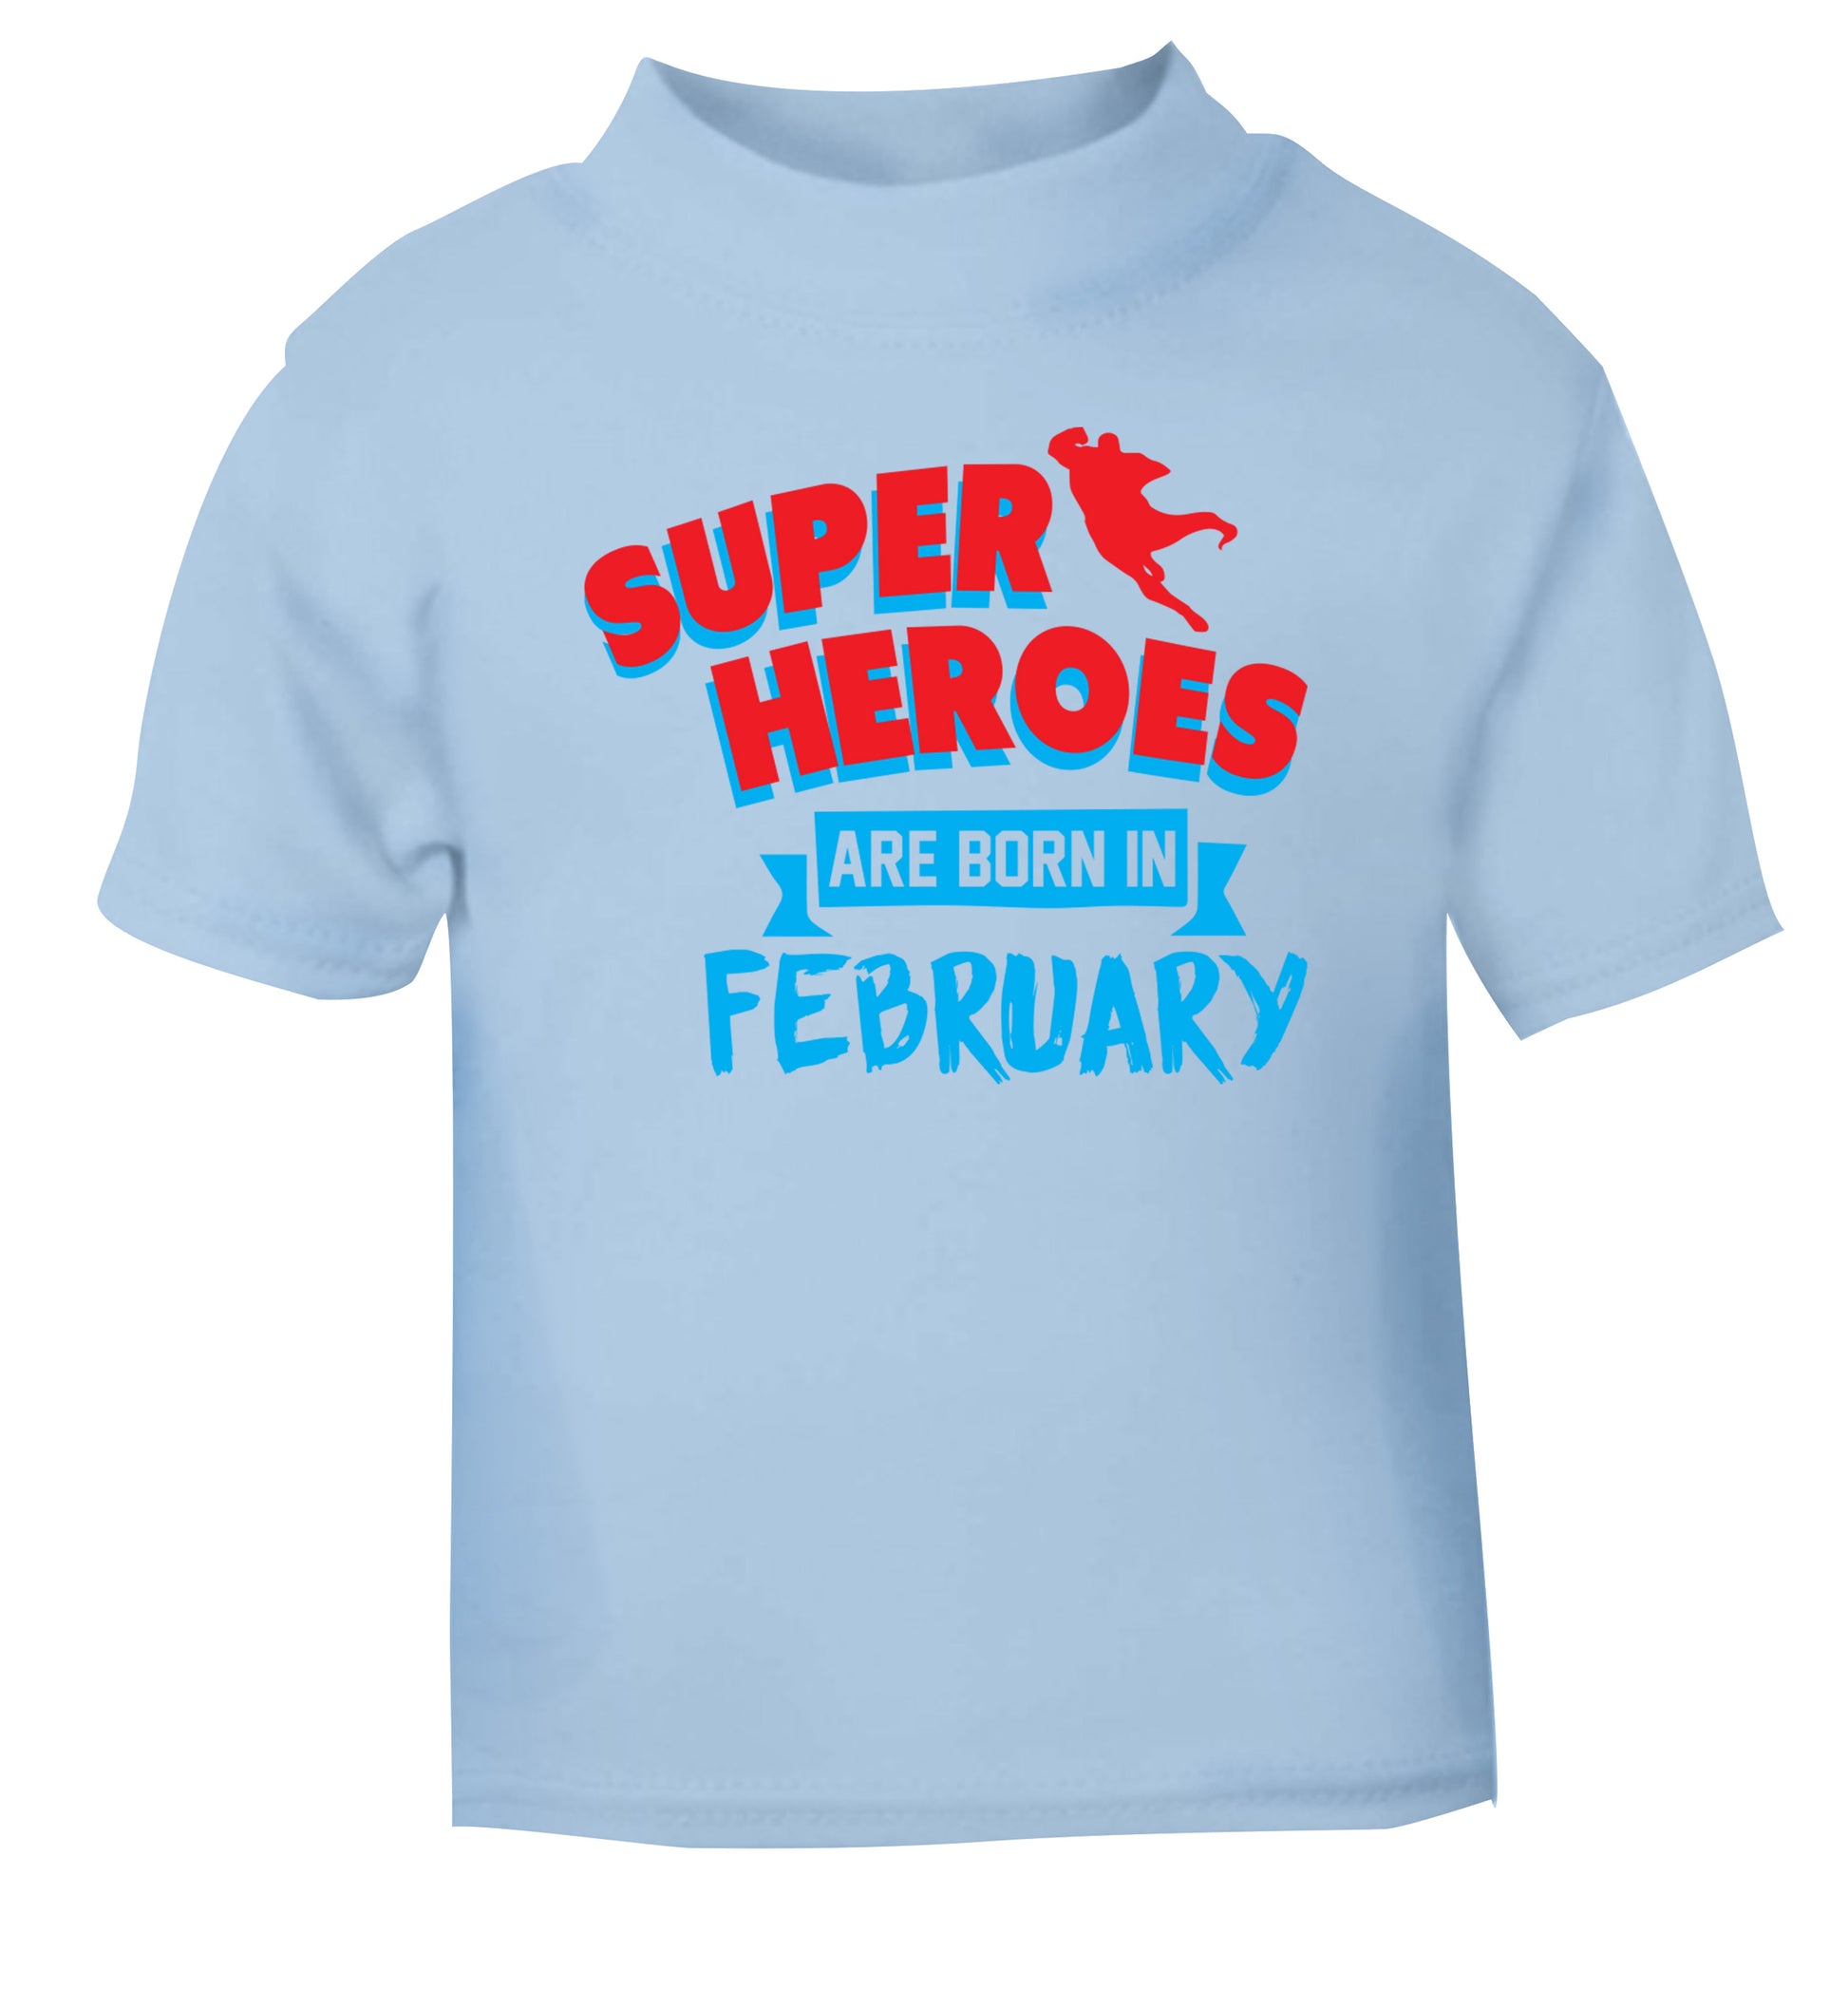 superheroes are born in February light blue Baby Toddler Tshirt 2 Years